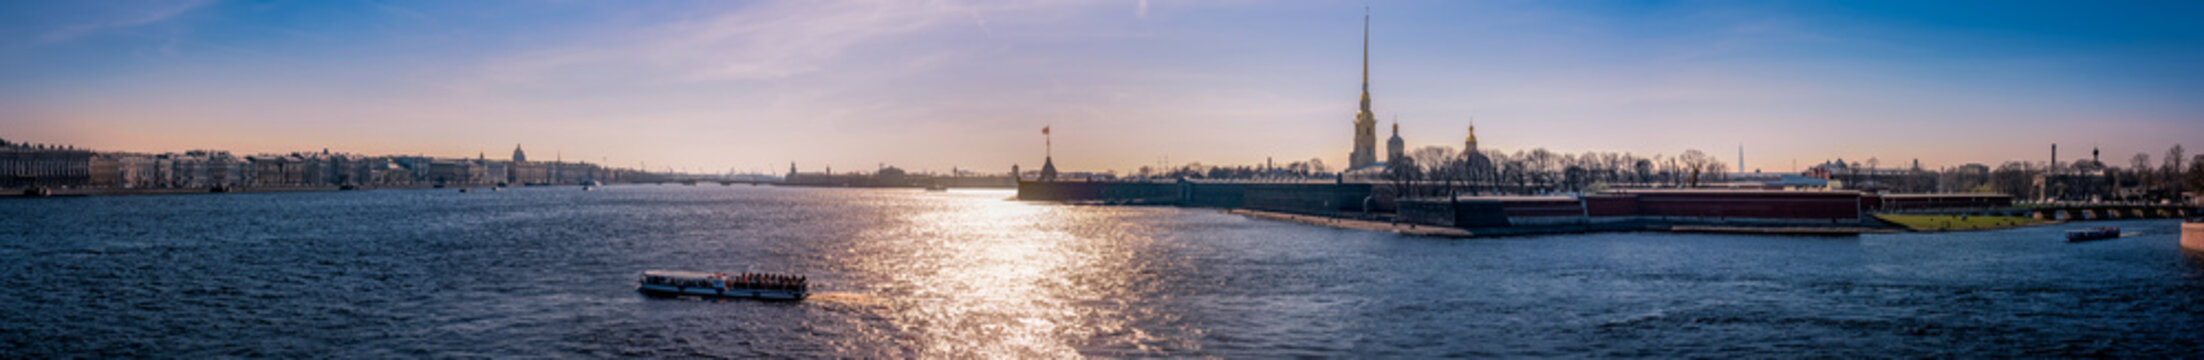 Backlight panorama of the Neva River at the downtown of Saint Petersburg, Russia with the Peter and Paul Fortress on its right bank